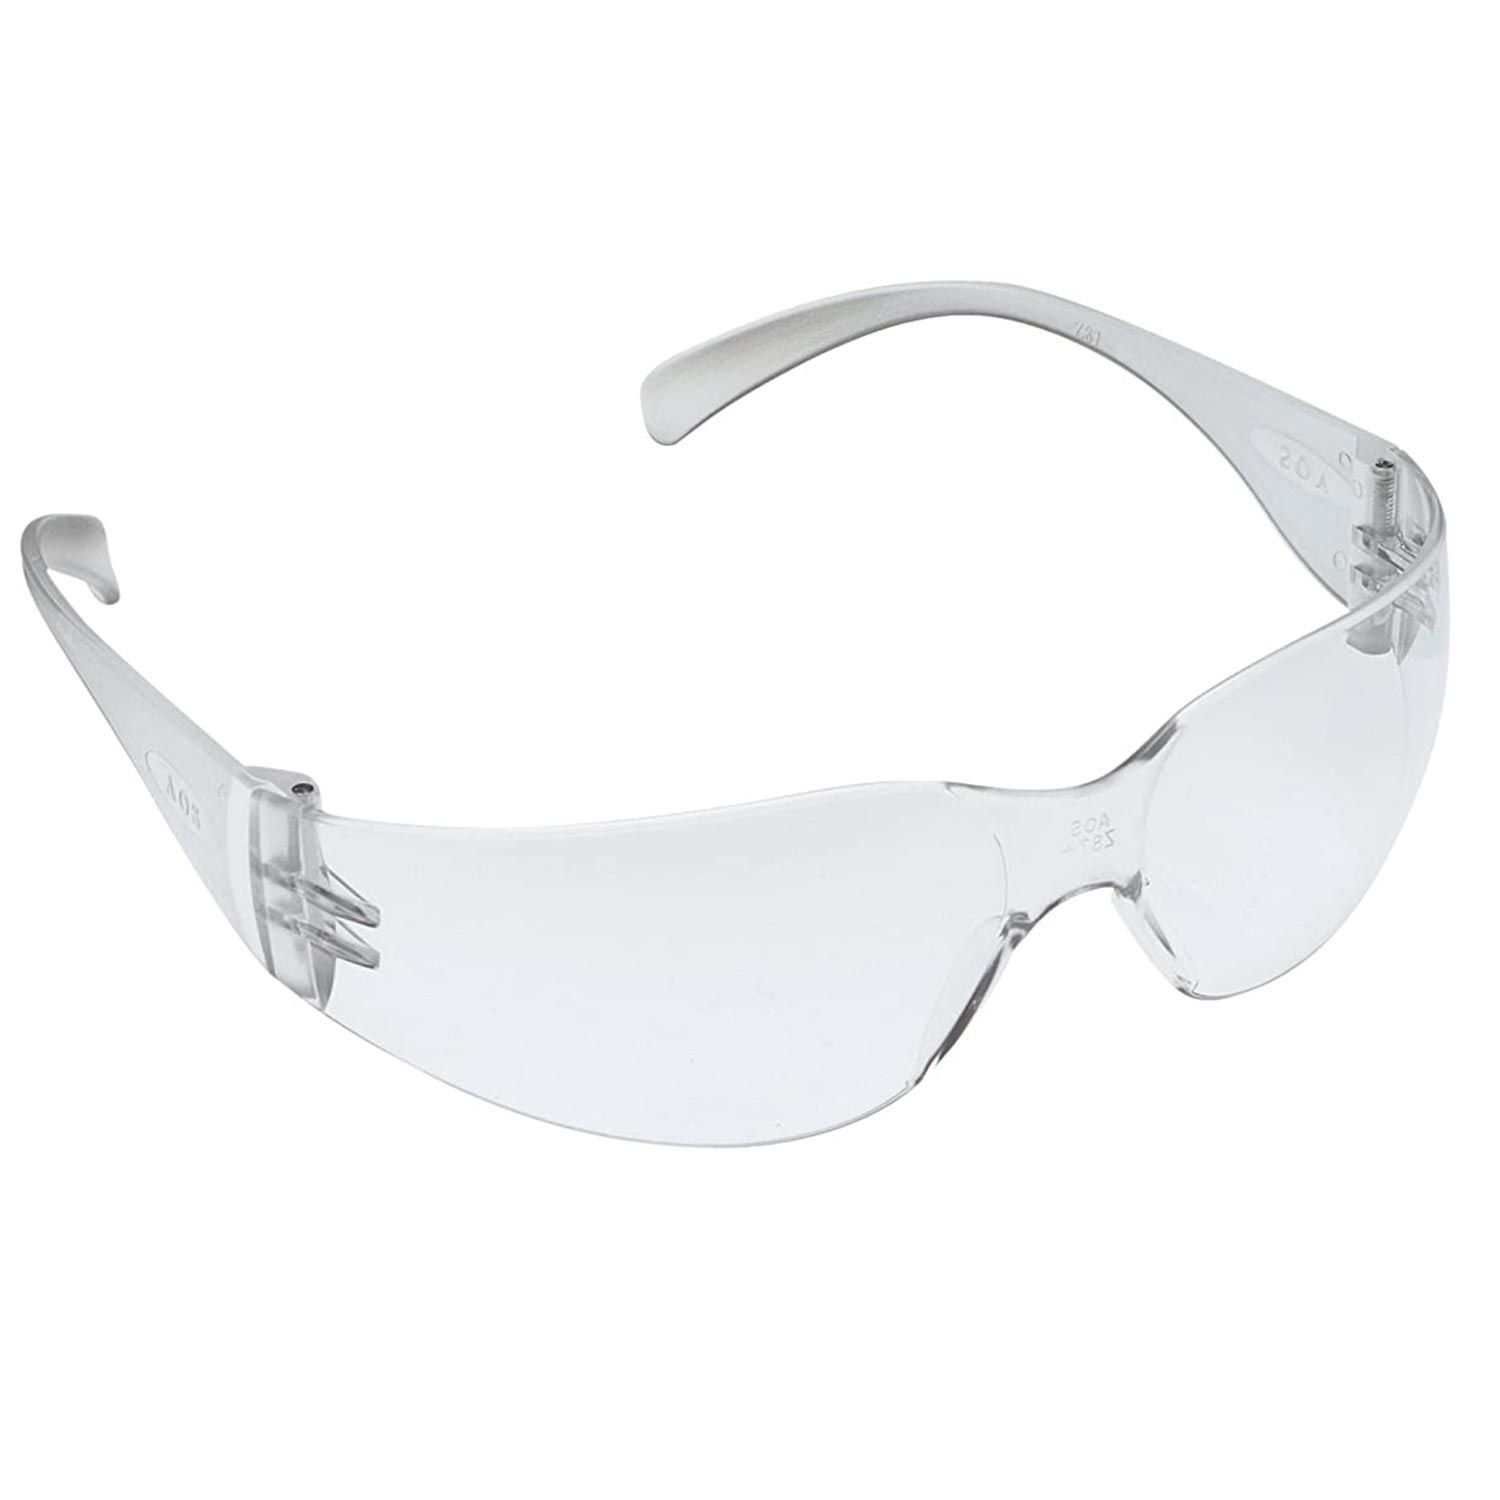 Safety Goggles, Mpow Safety Glasses with Anti Fog